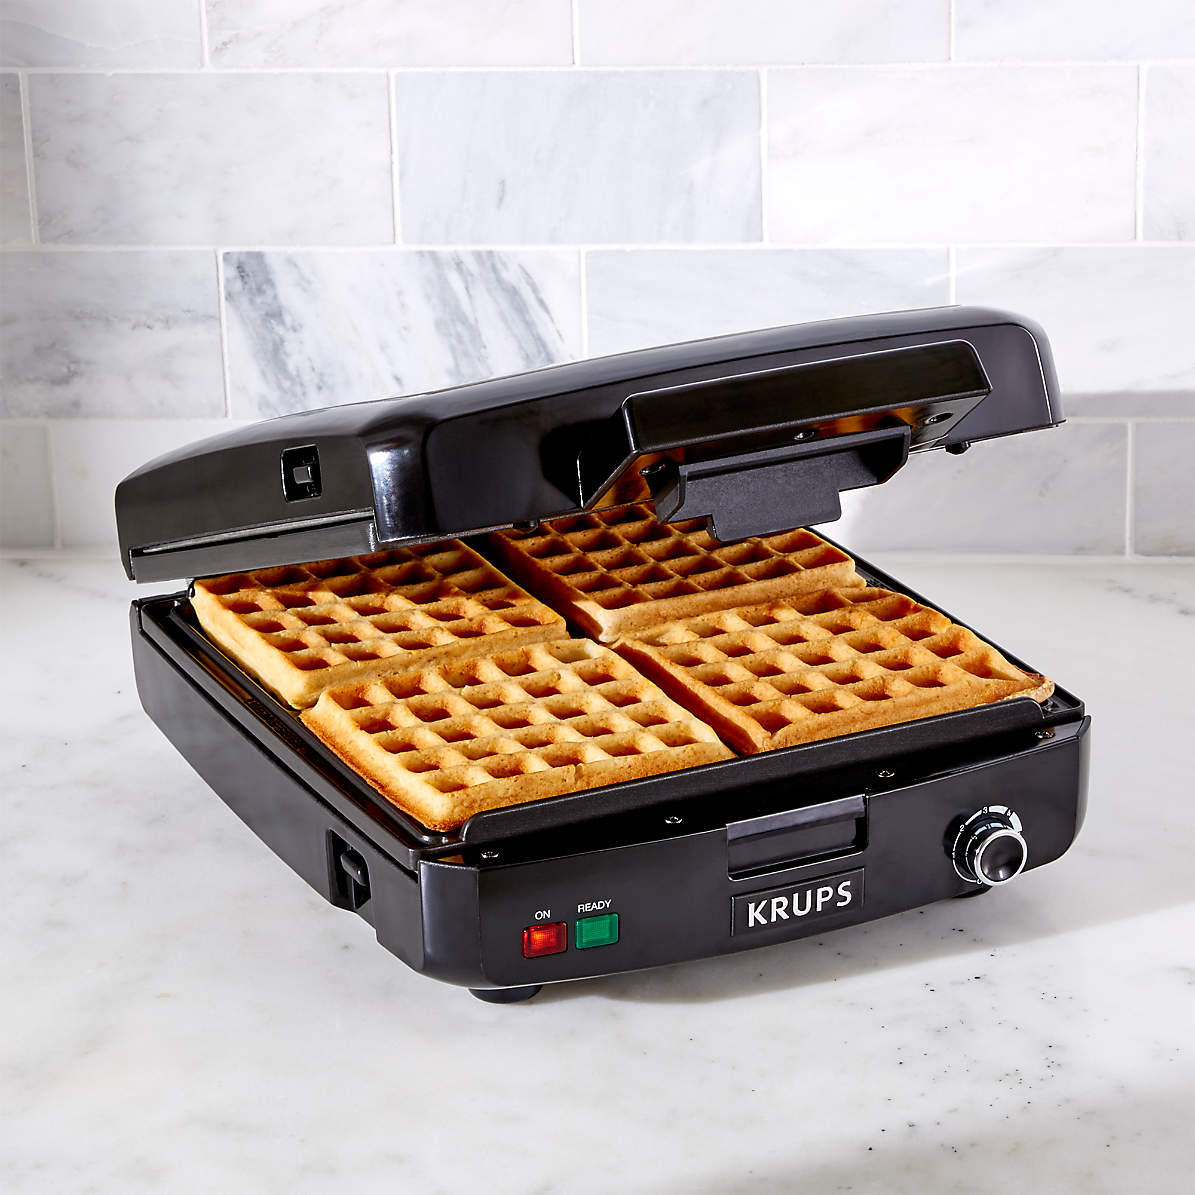 KRUPS Belgian Waffle Maker 4 Slices Waffle Maker with Removable Plates Black and Silver 